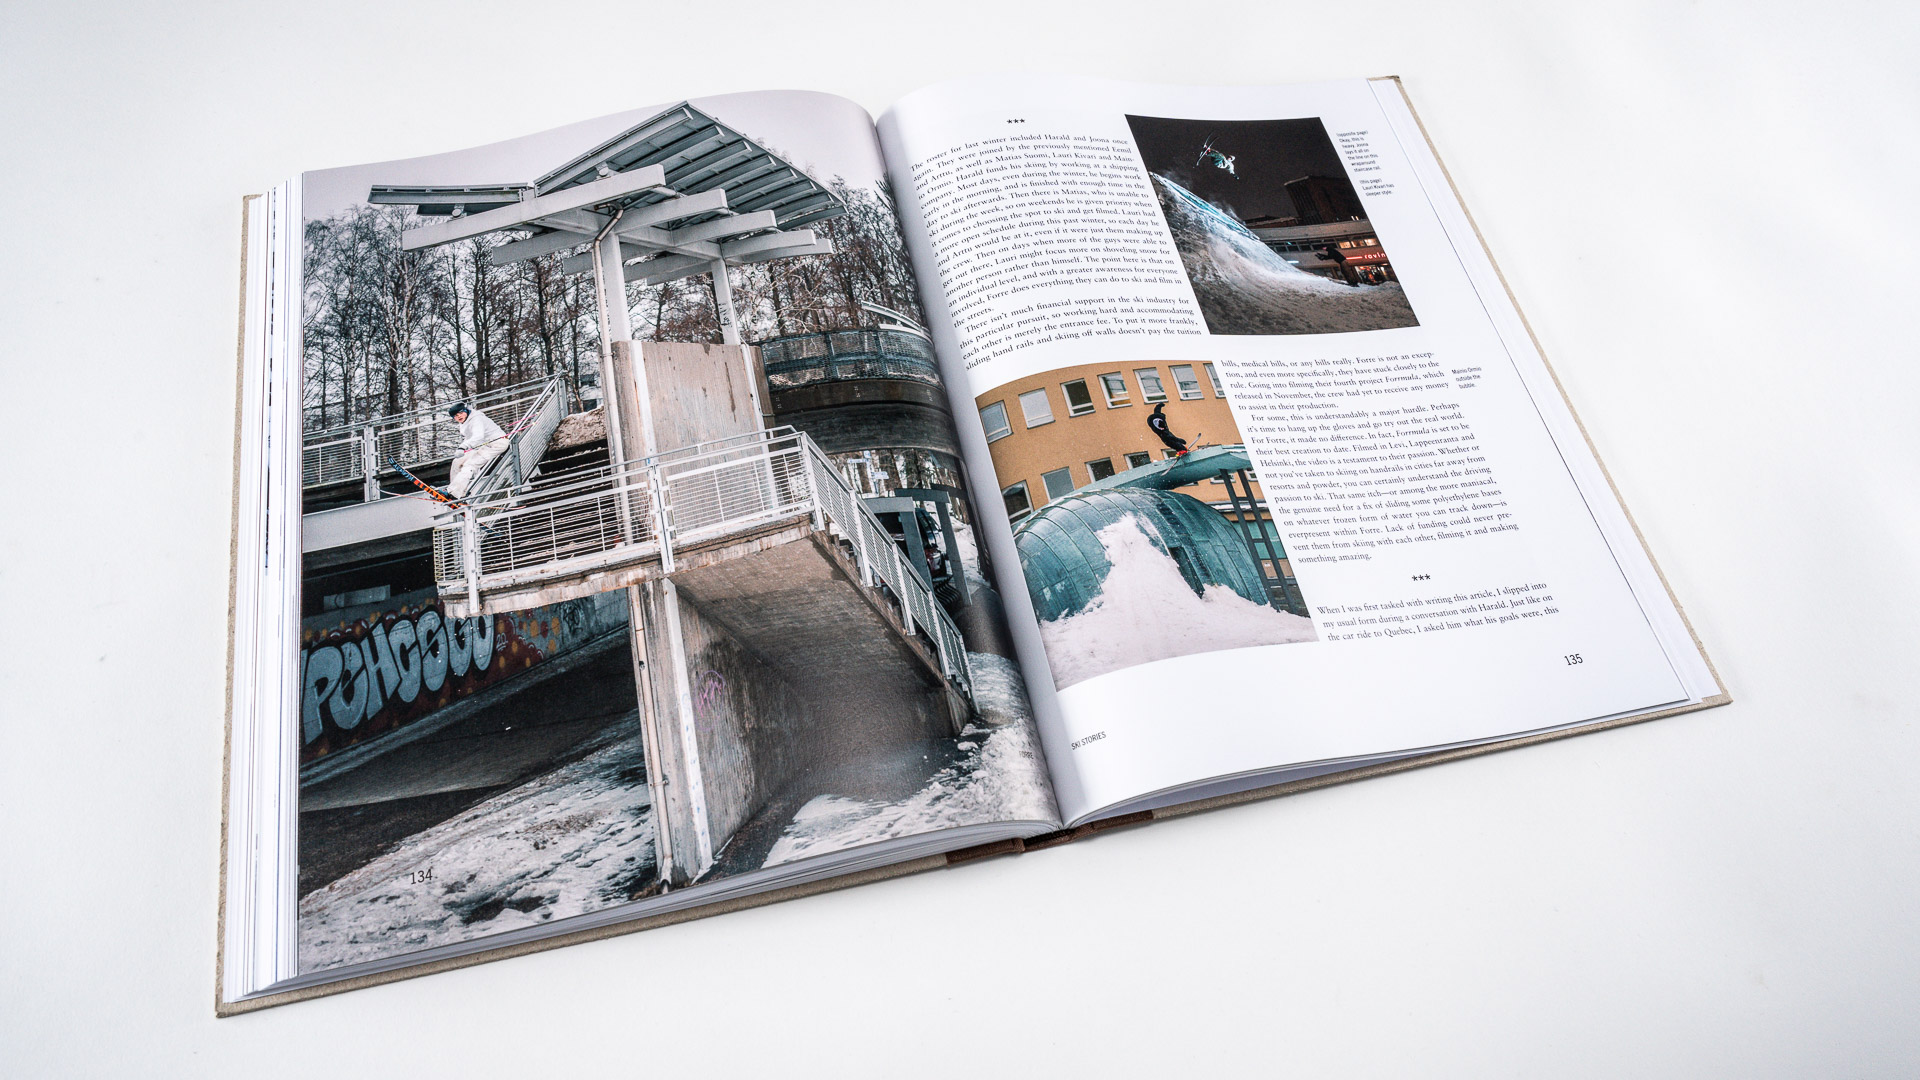 Forre crew feature in Ski Stories Volume 3